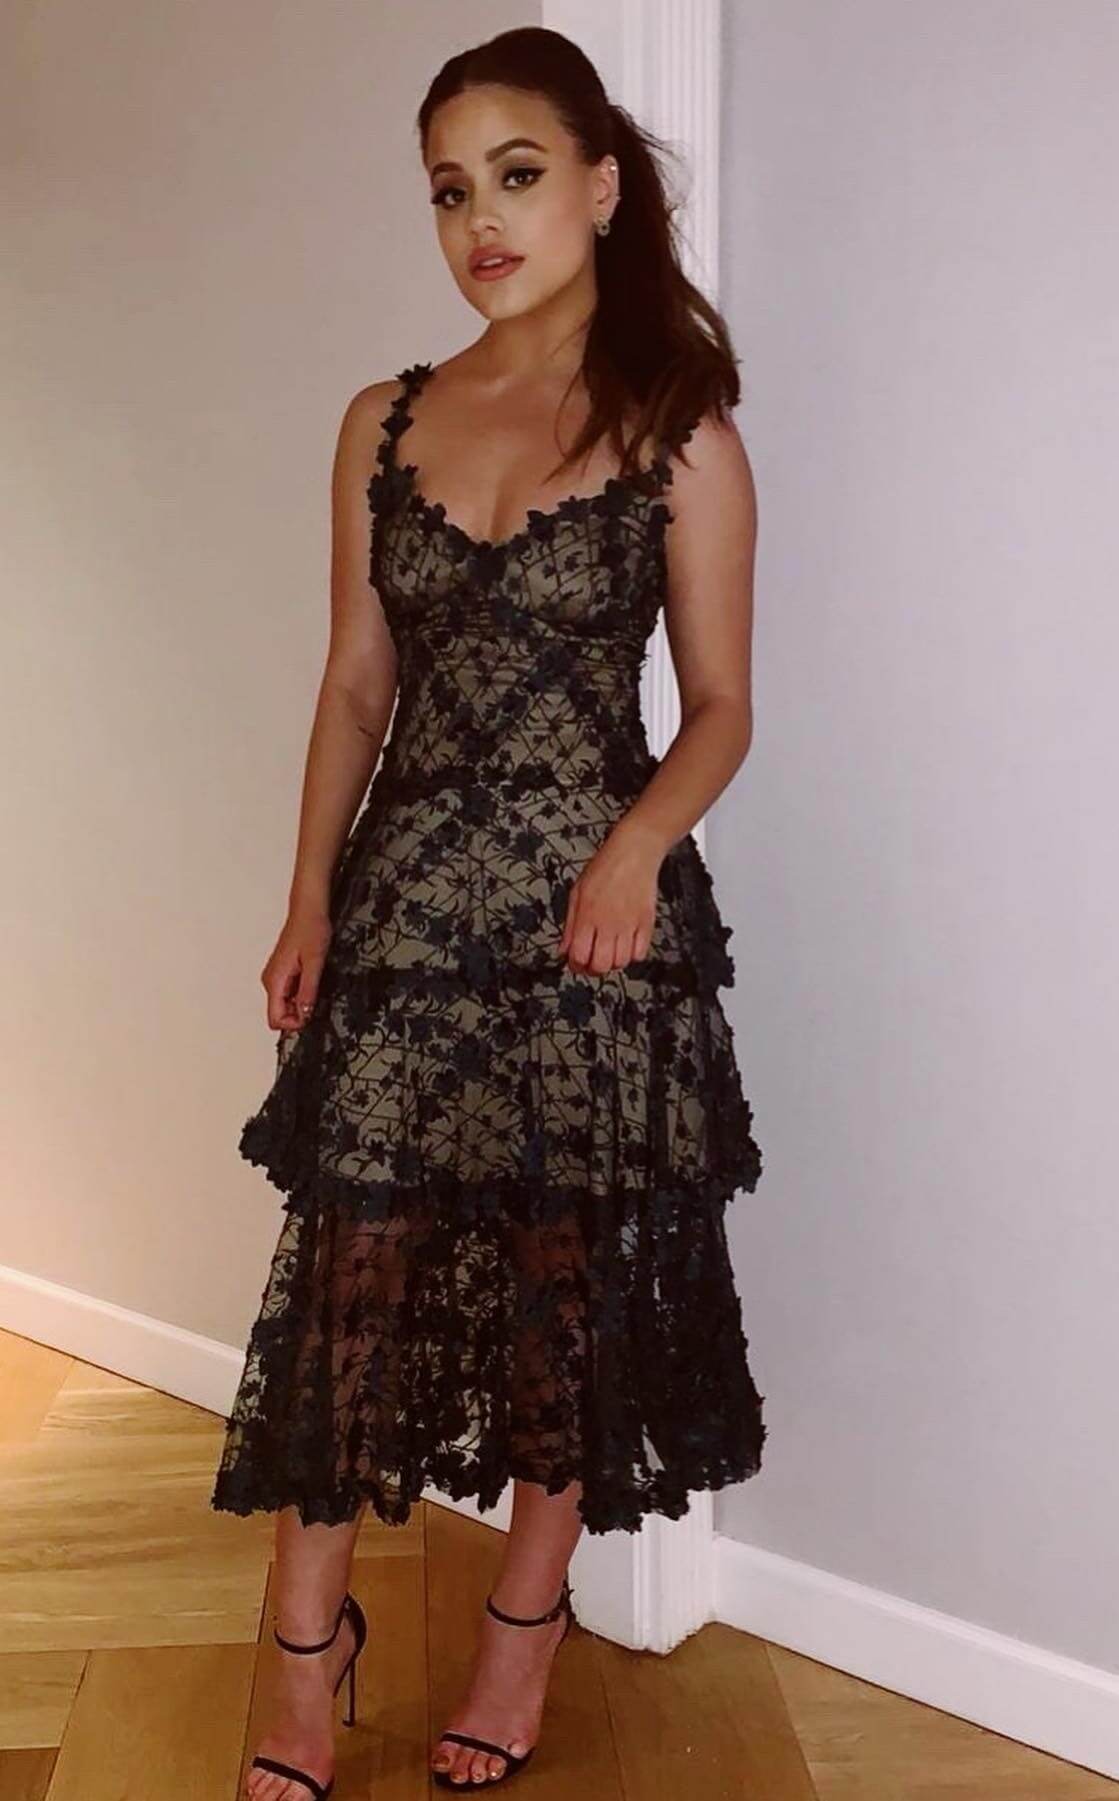 Sarah Jeffery In Black Strap Sleeves Lace Design Crochet Ruffle Dress Outfits